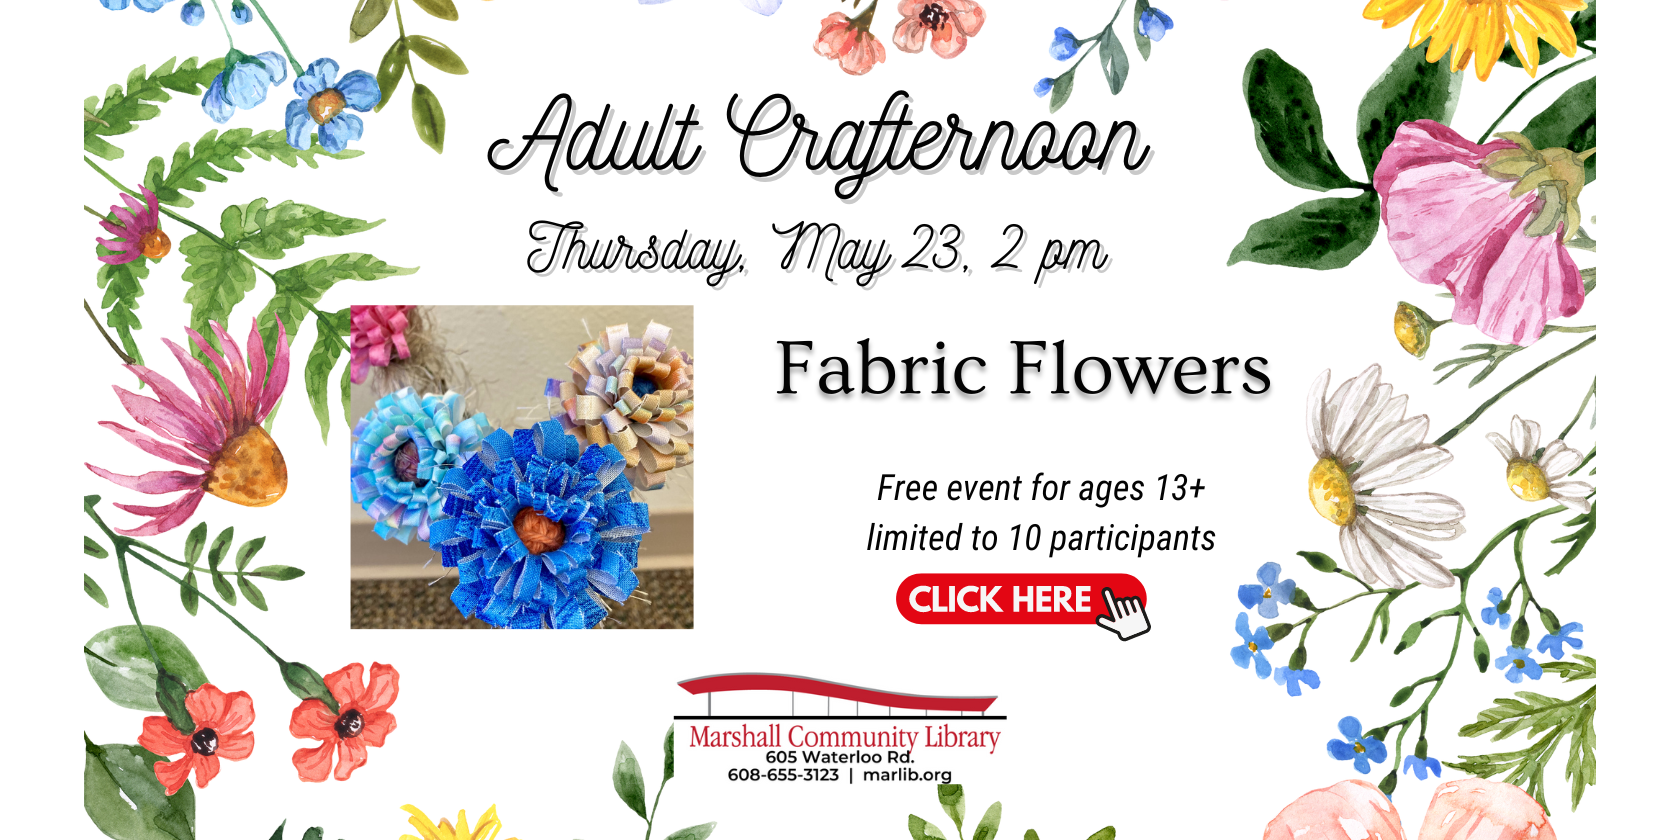 Adult Crafternoon: Fabric Flowers May 23, 2 pm